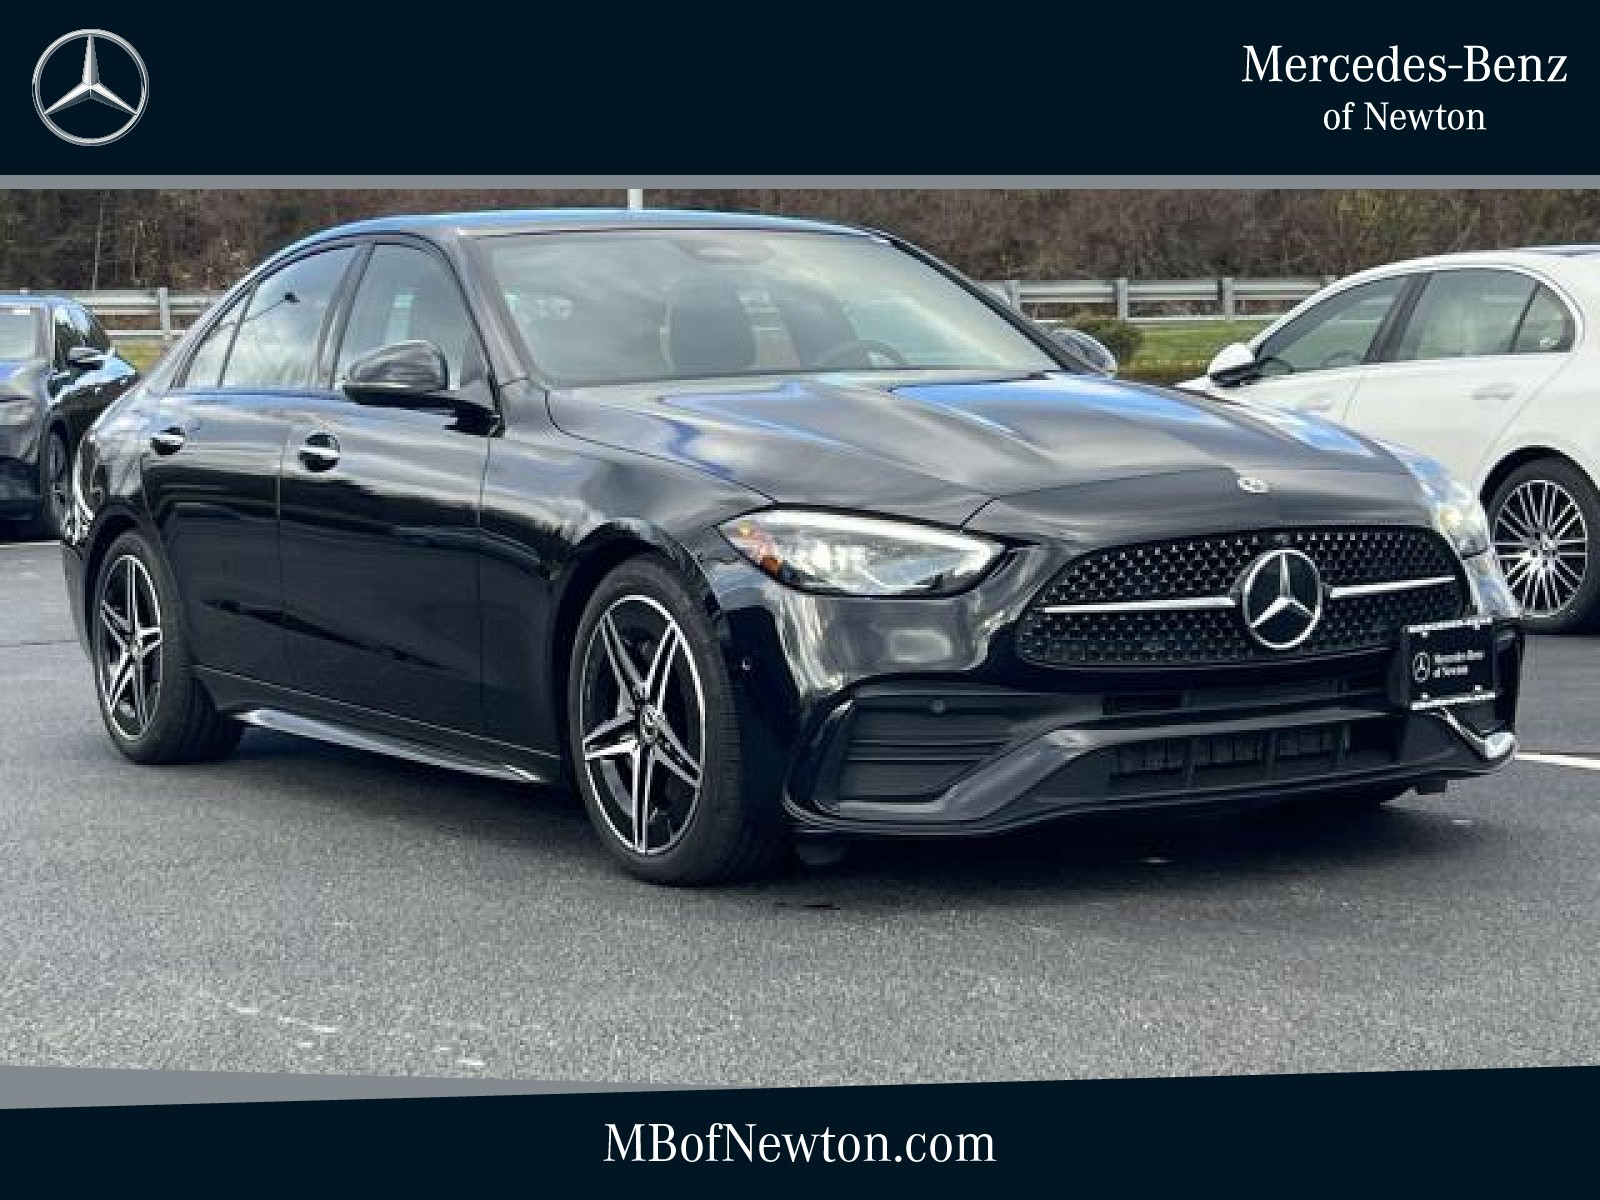 The New 'W206' Mercedes C-Class Is Here With Inline-Fours Only, News